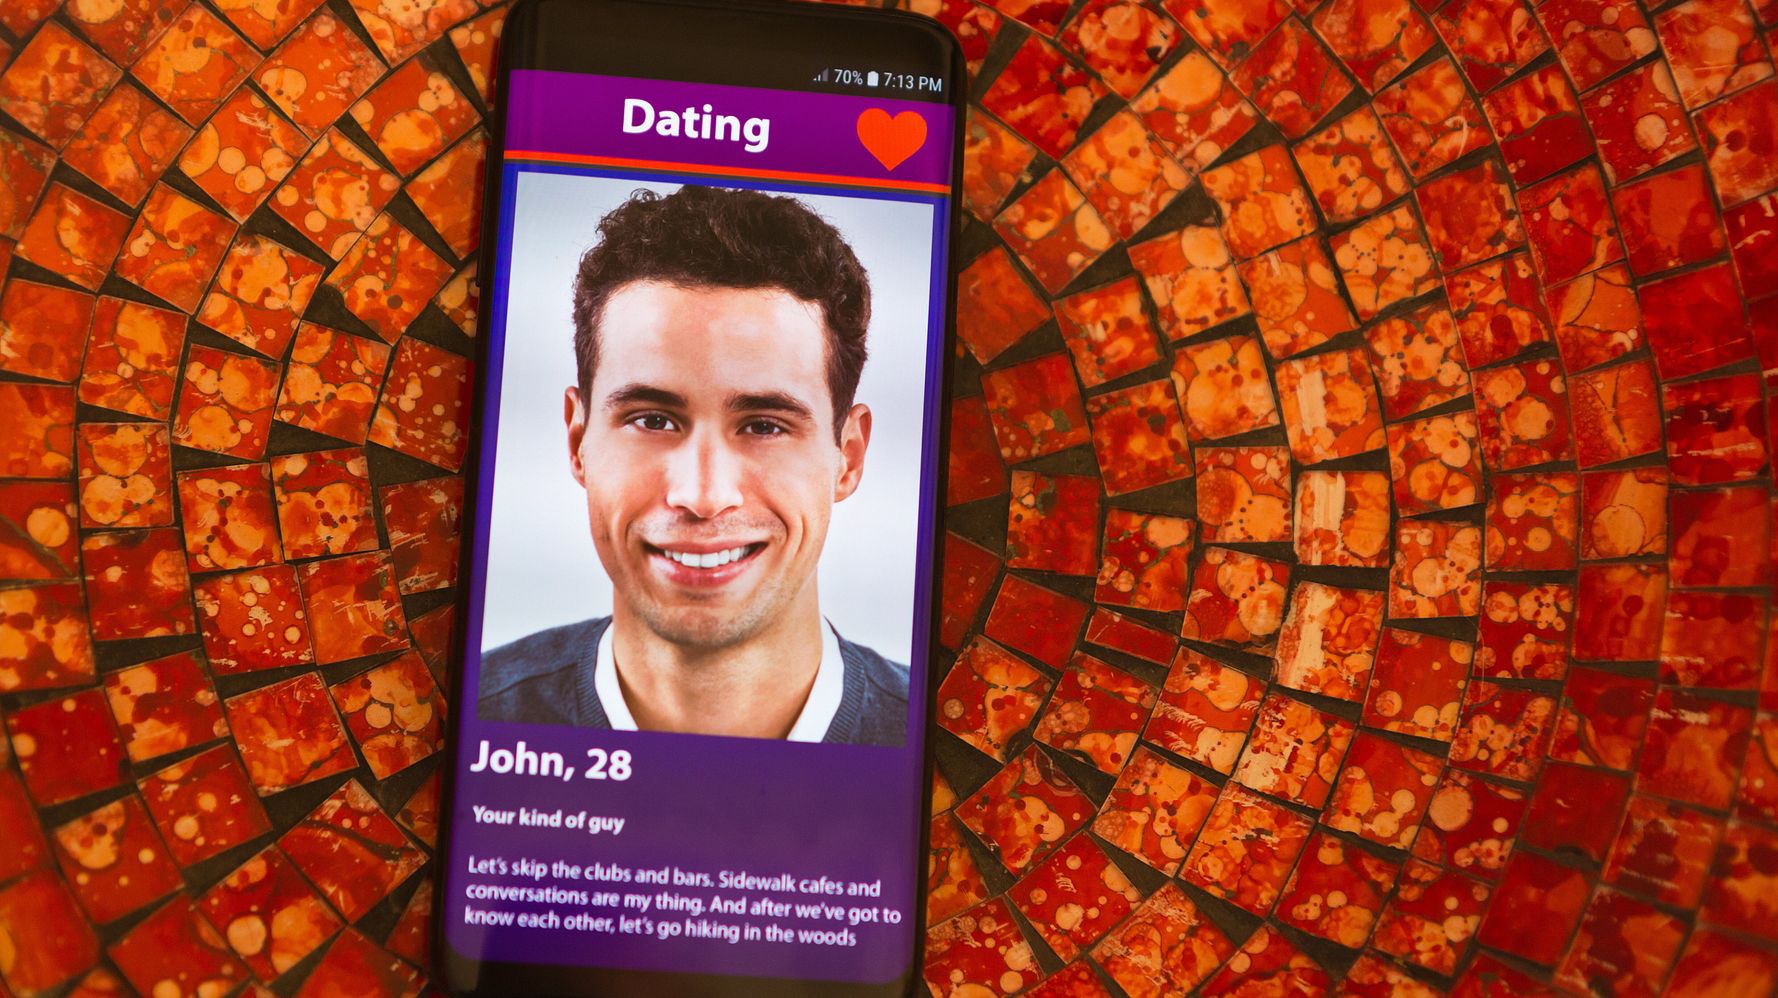 20 online dating cliches - and what they really mean